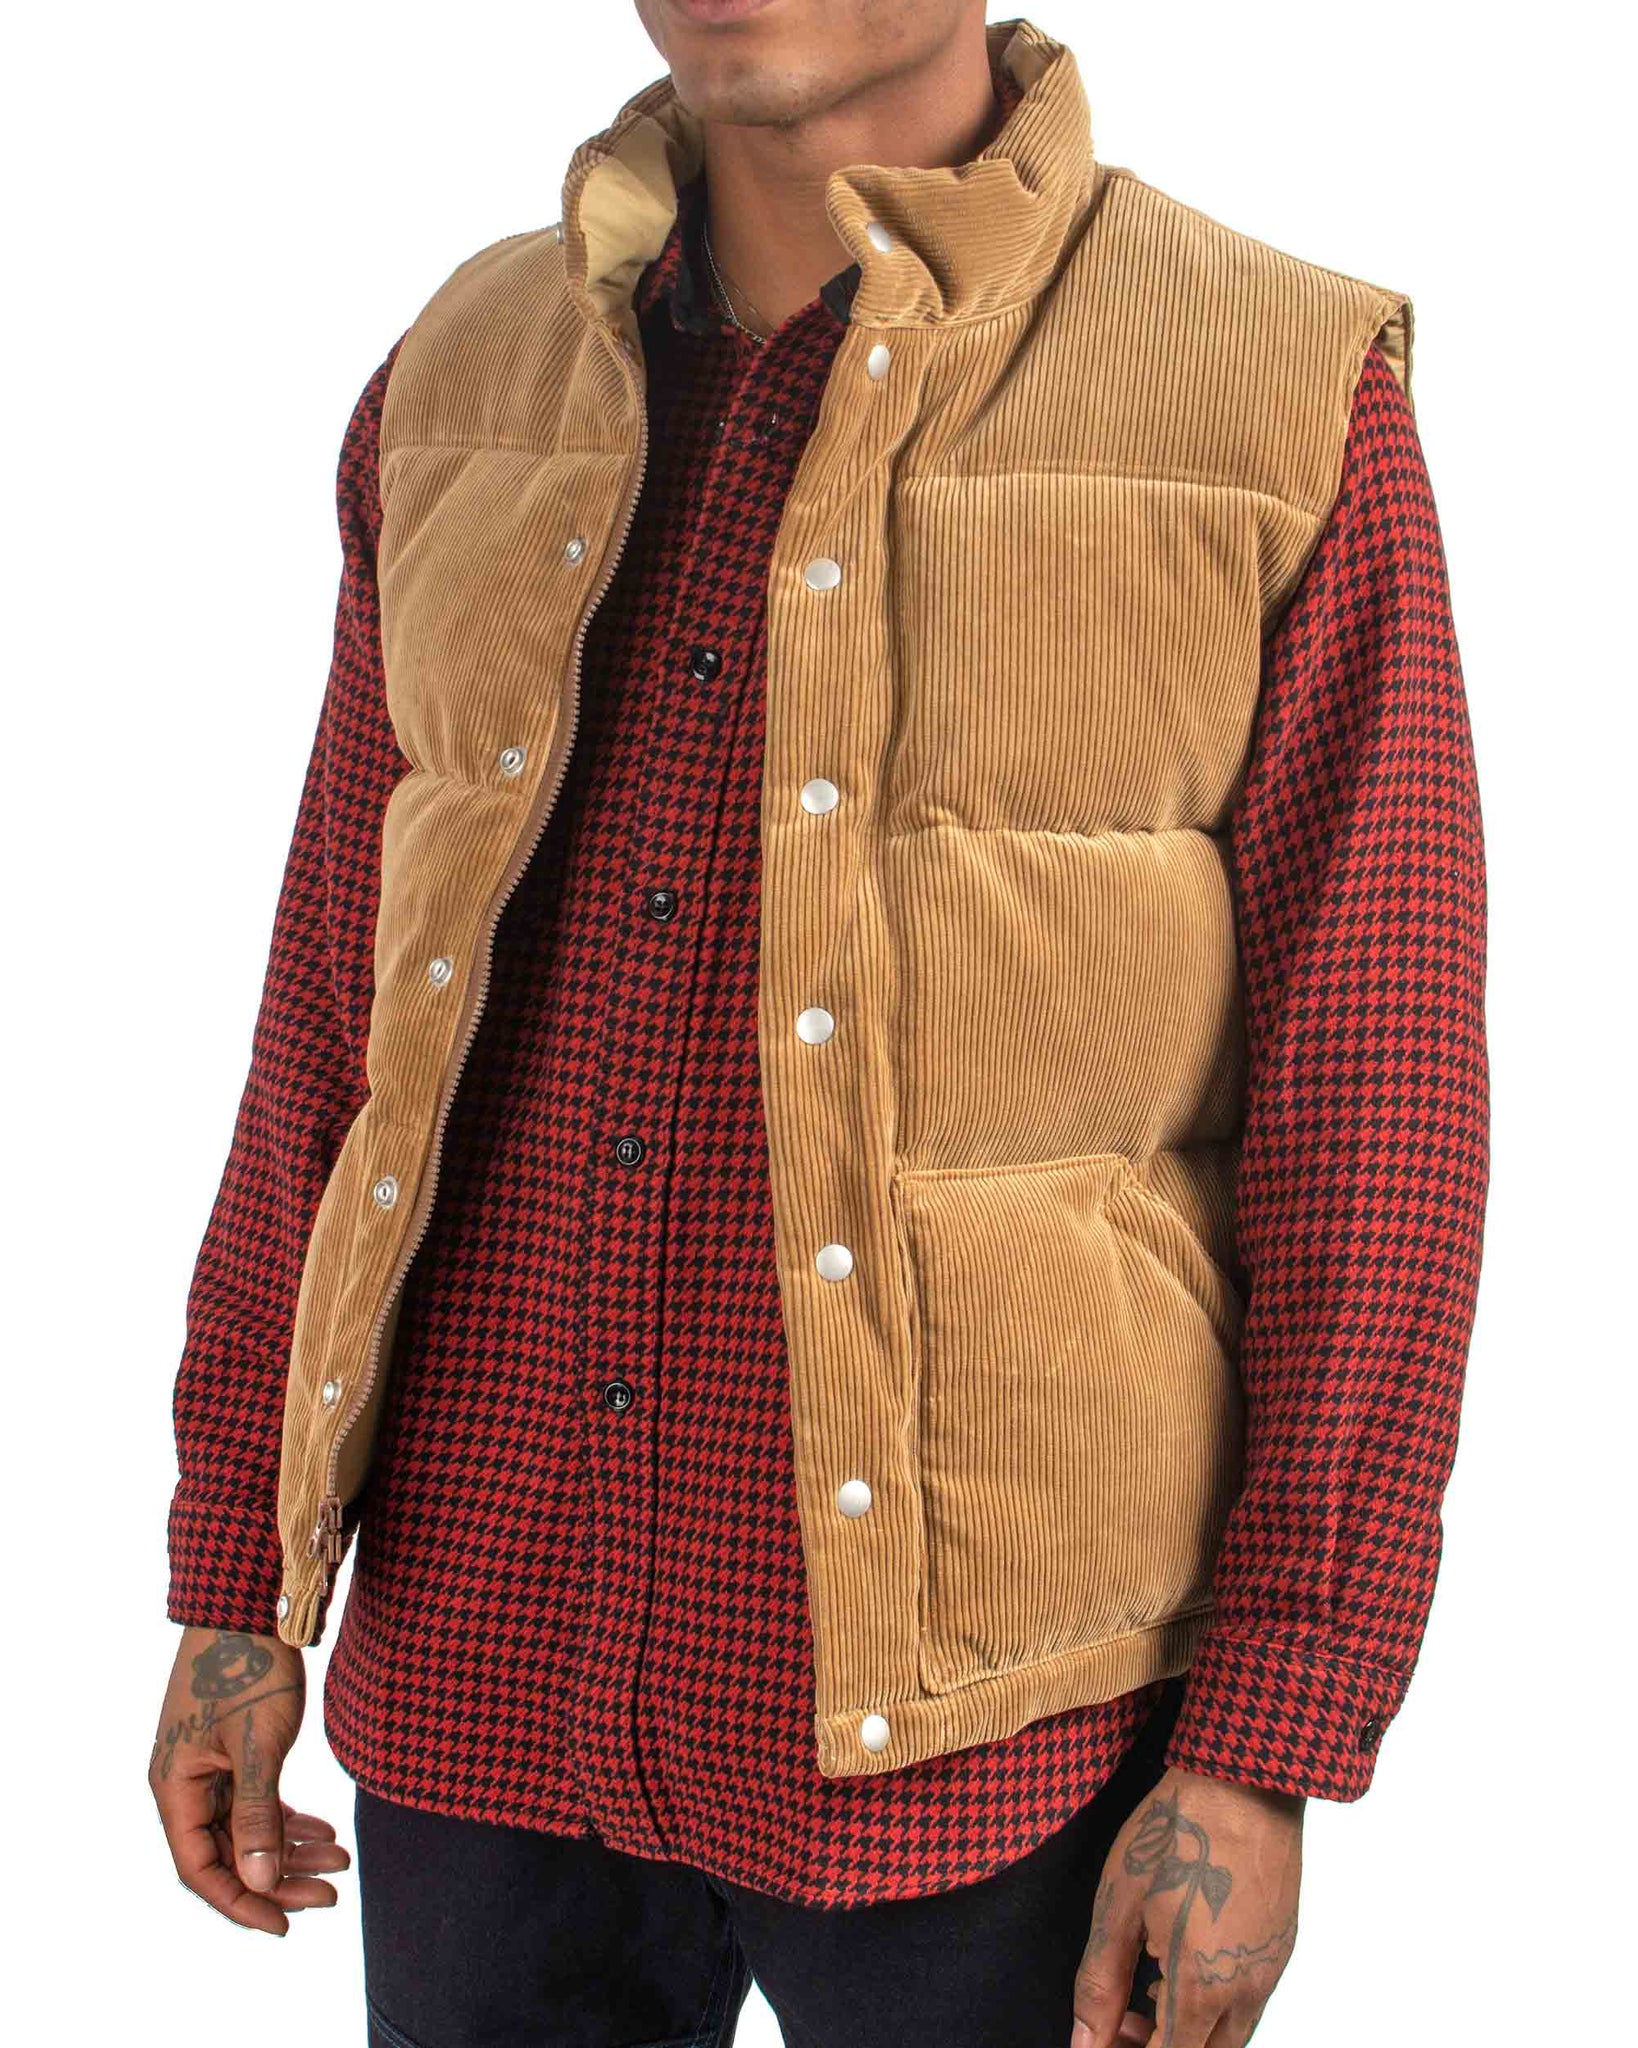 The Real McCoy's MJ21124 Corduroy Down Vest Brown